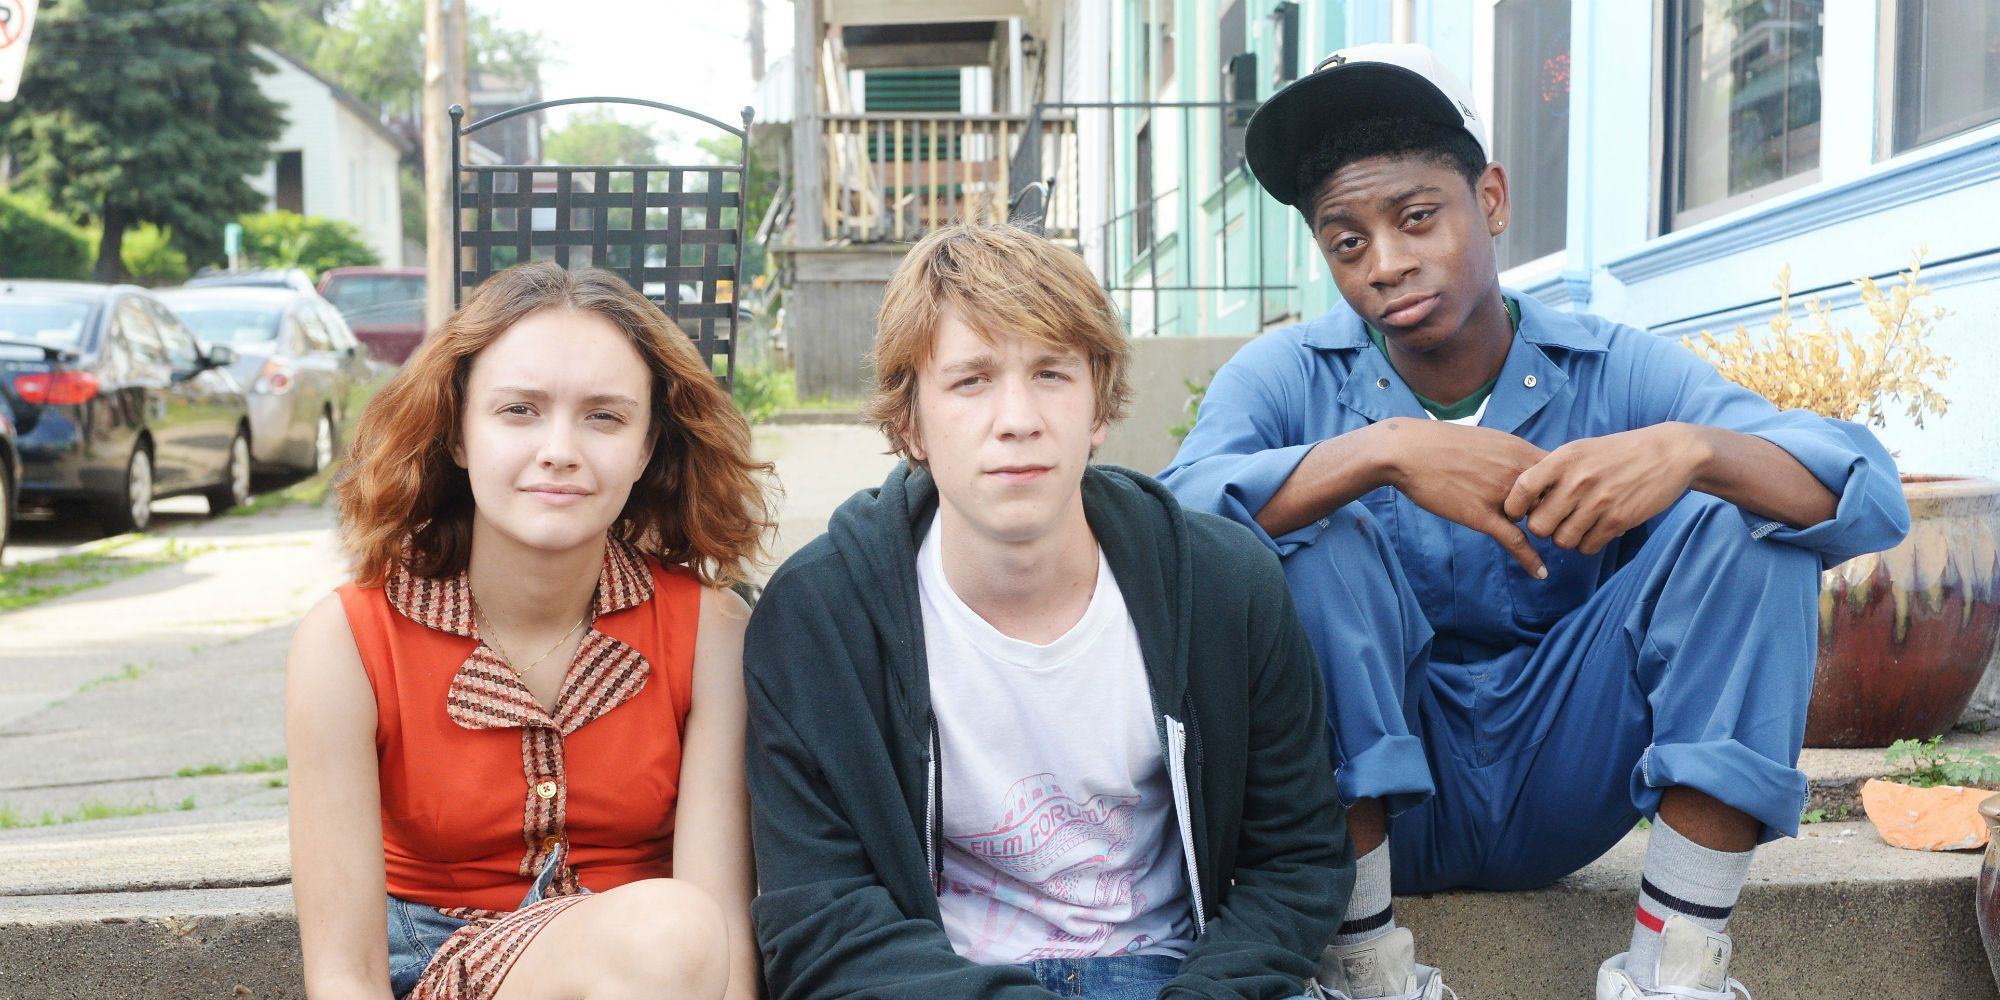 Olivia Cooke, Thomas Mann and RJ Cyler sit together on 'Me and the Earl and the Dying Girl'